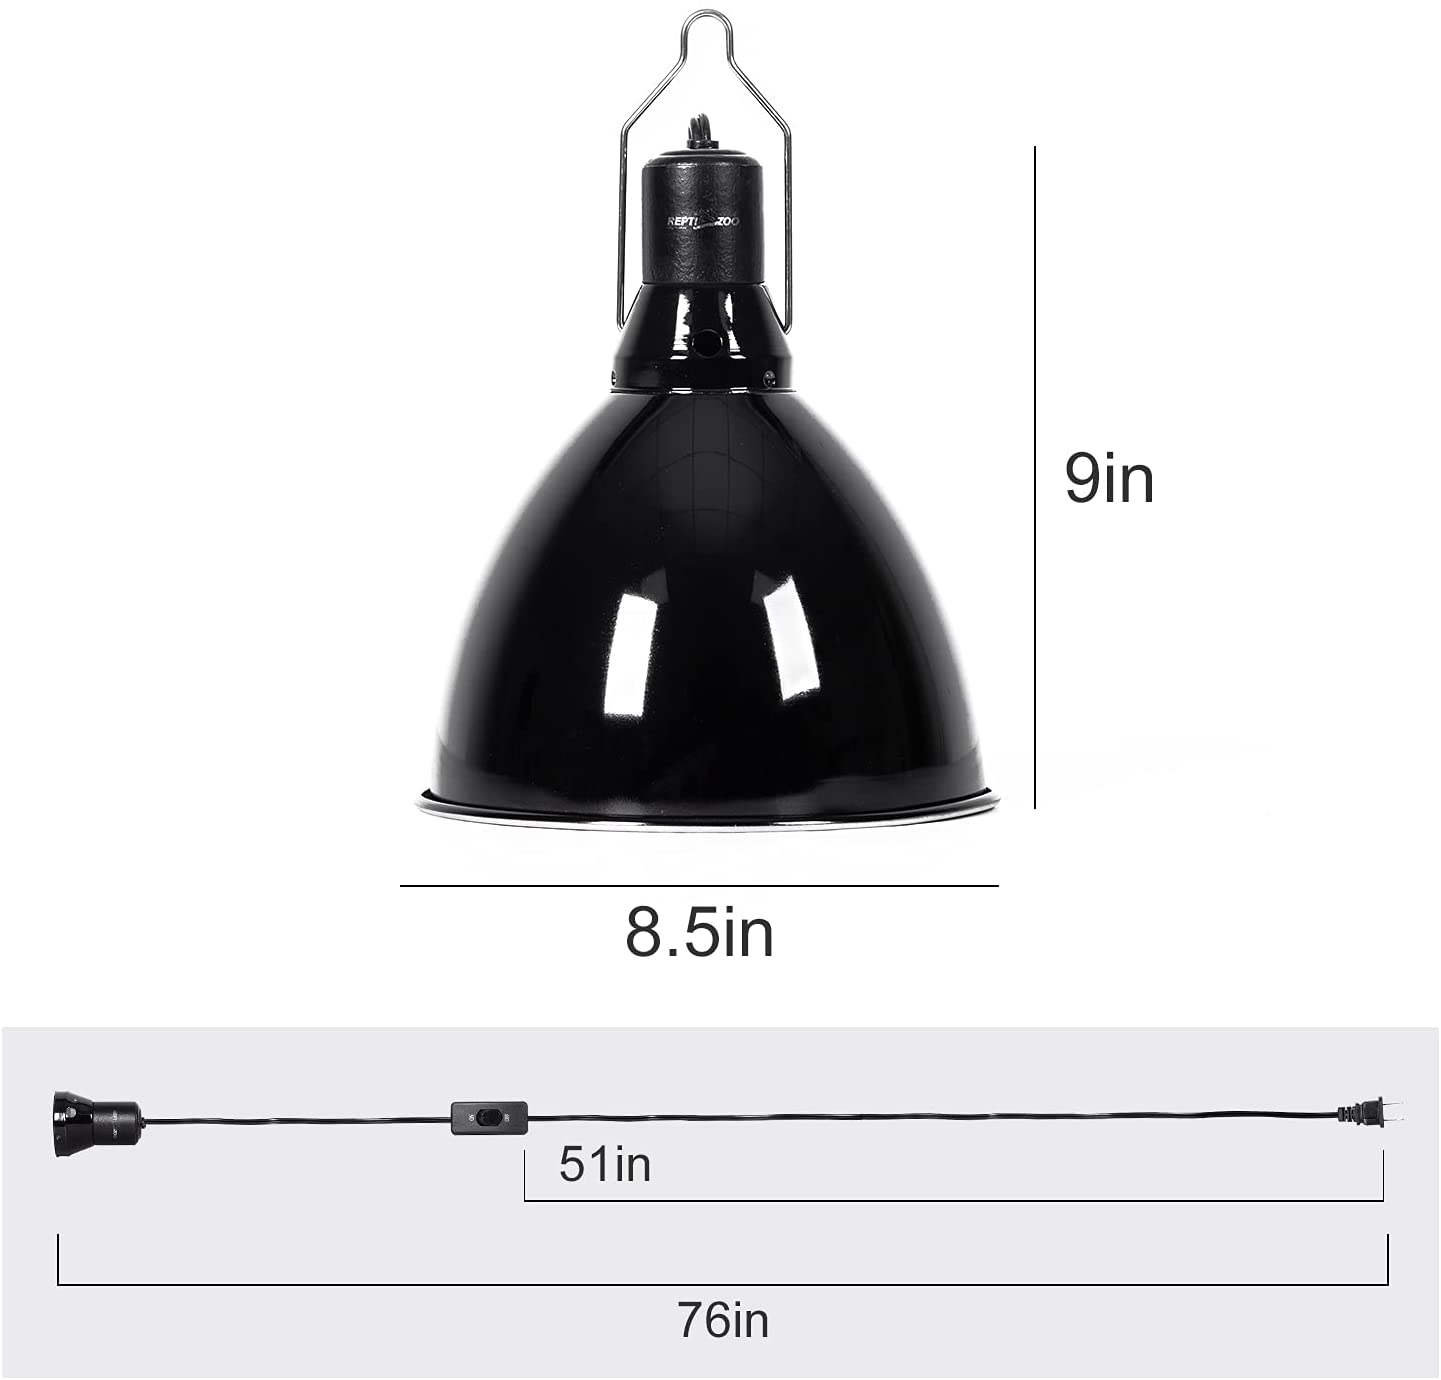 REPTI ZOO 8.5 Inch Reptile Light Fixture 200W 2 in 1 E26 Base with Removable Ceramic Socket with on off Toggle Switch in Black,Aquarium Dome Reptile UVB Light Socket Fixture (Without Bulbs)